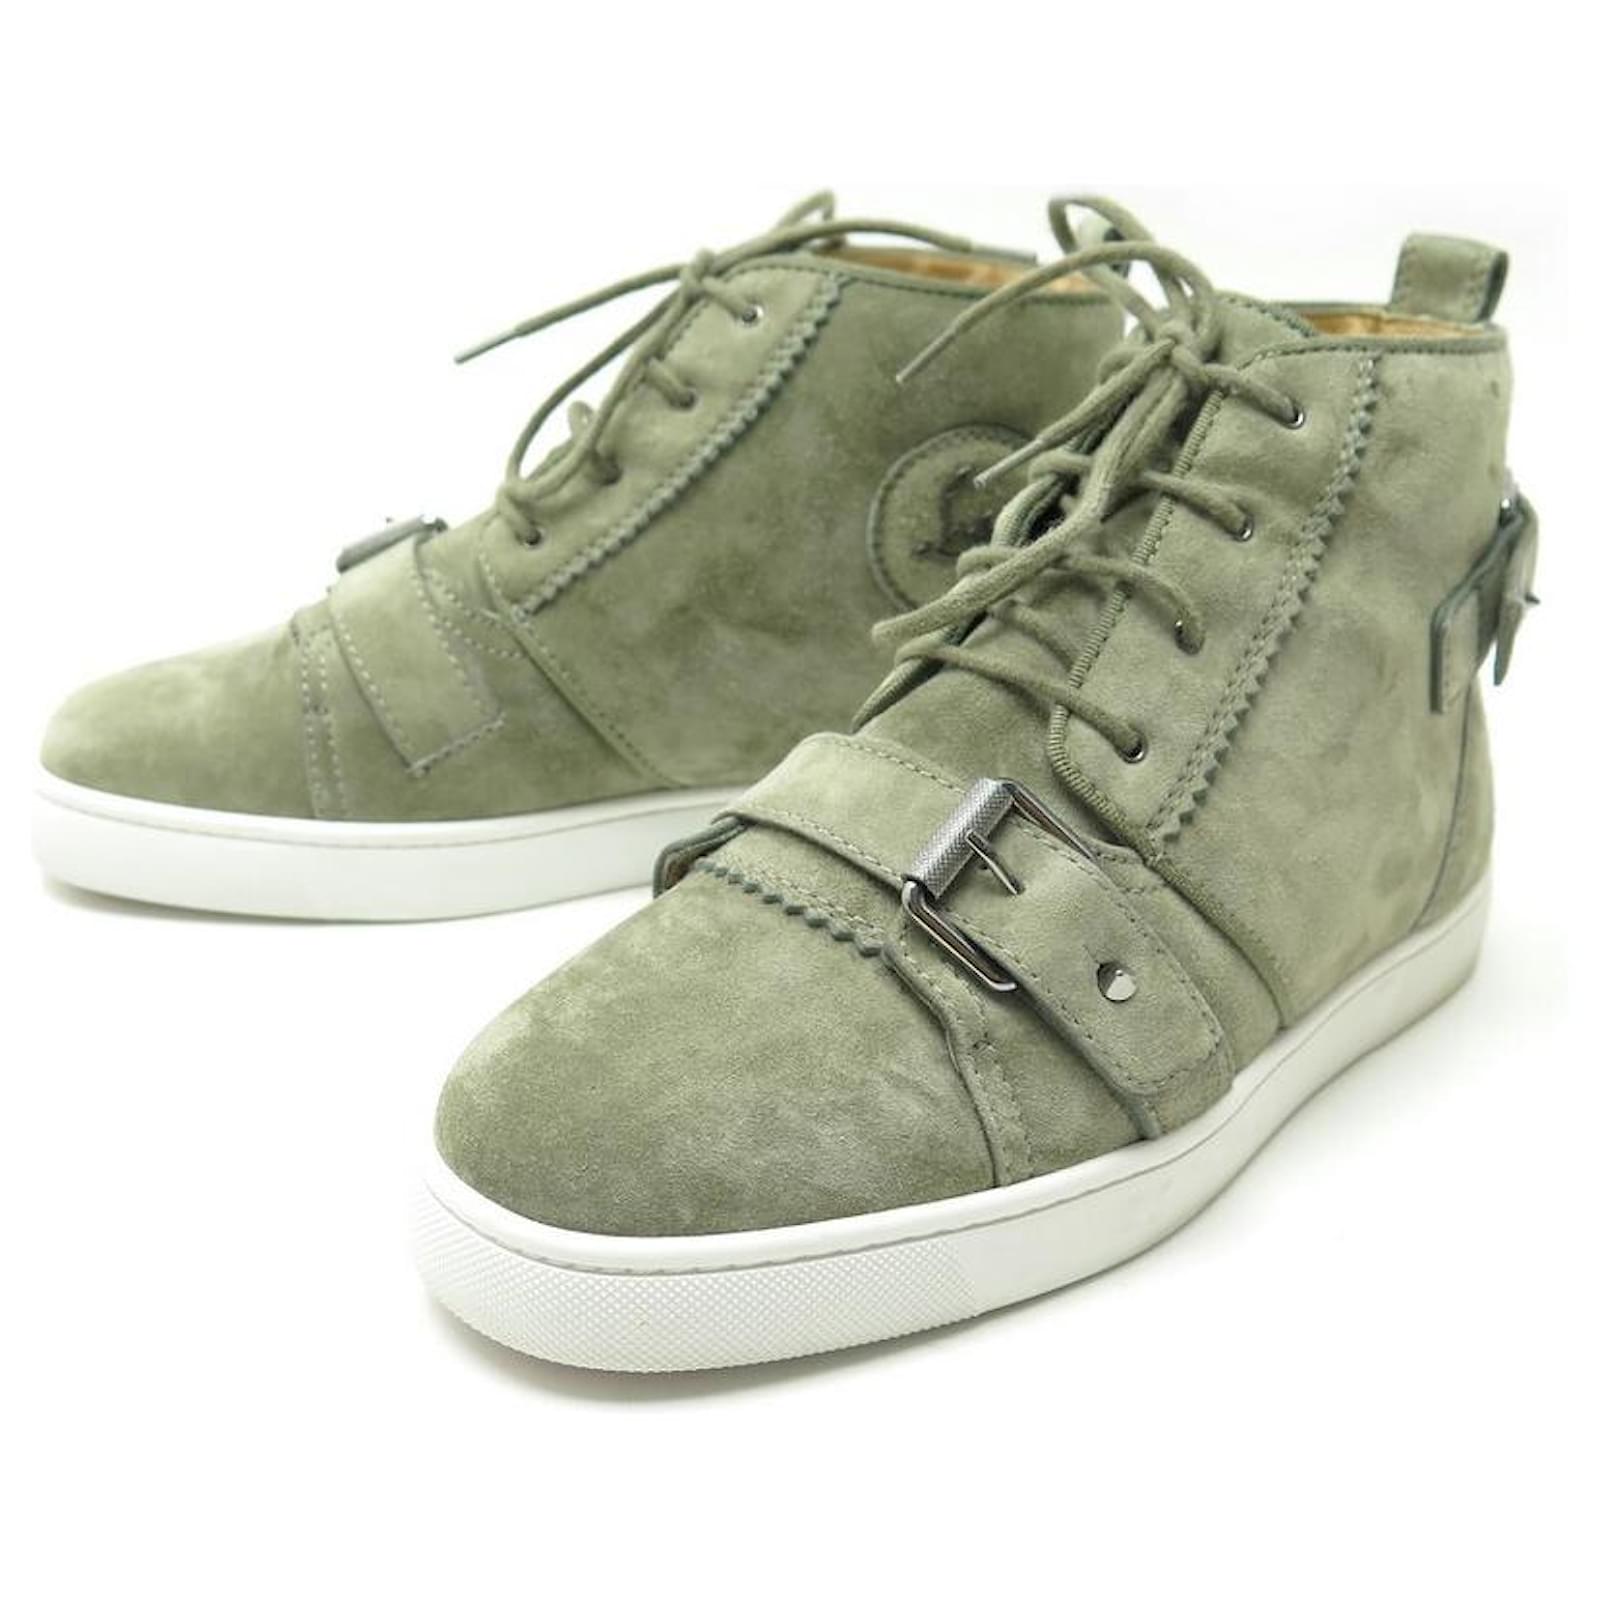 Christian Louboutin suede sneakers